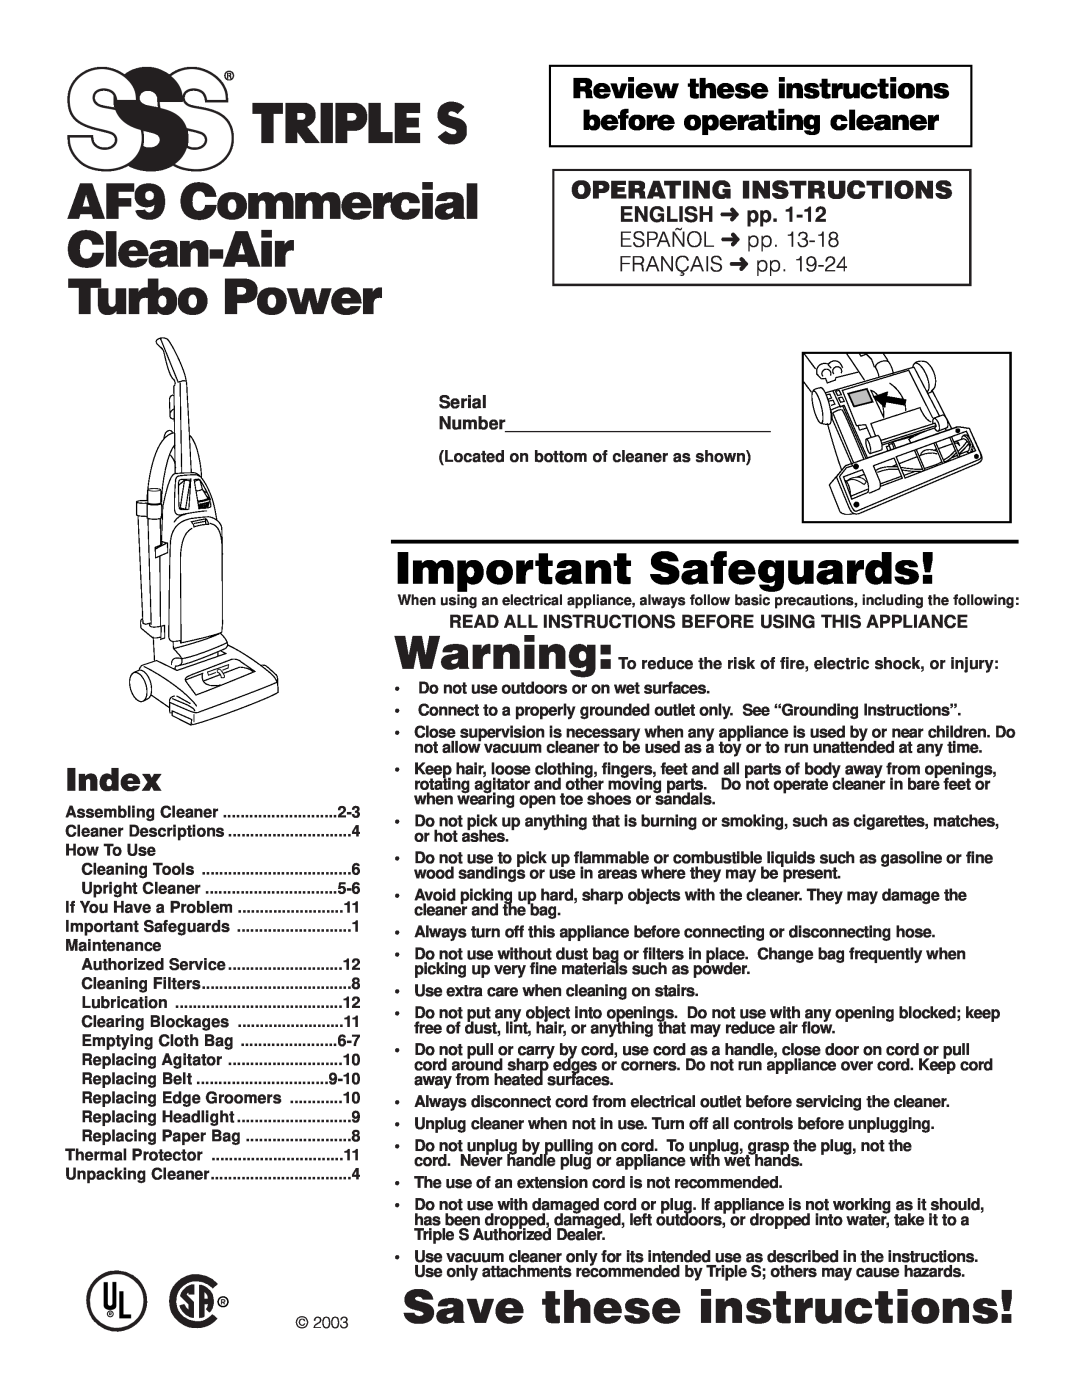 SSS manual Save these instructions, Index, Operating Instructions, ENGLISH pp, AF9 Commercial Clean-Air Turbo Power 